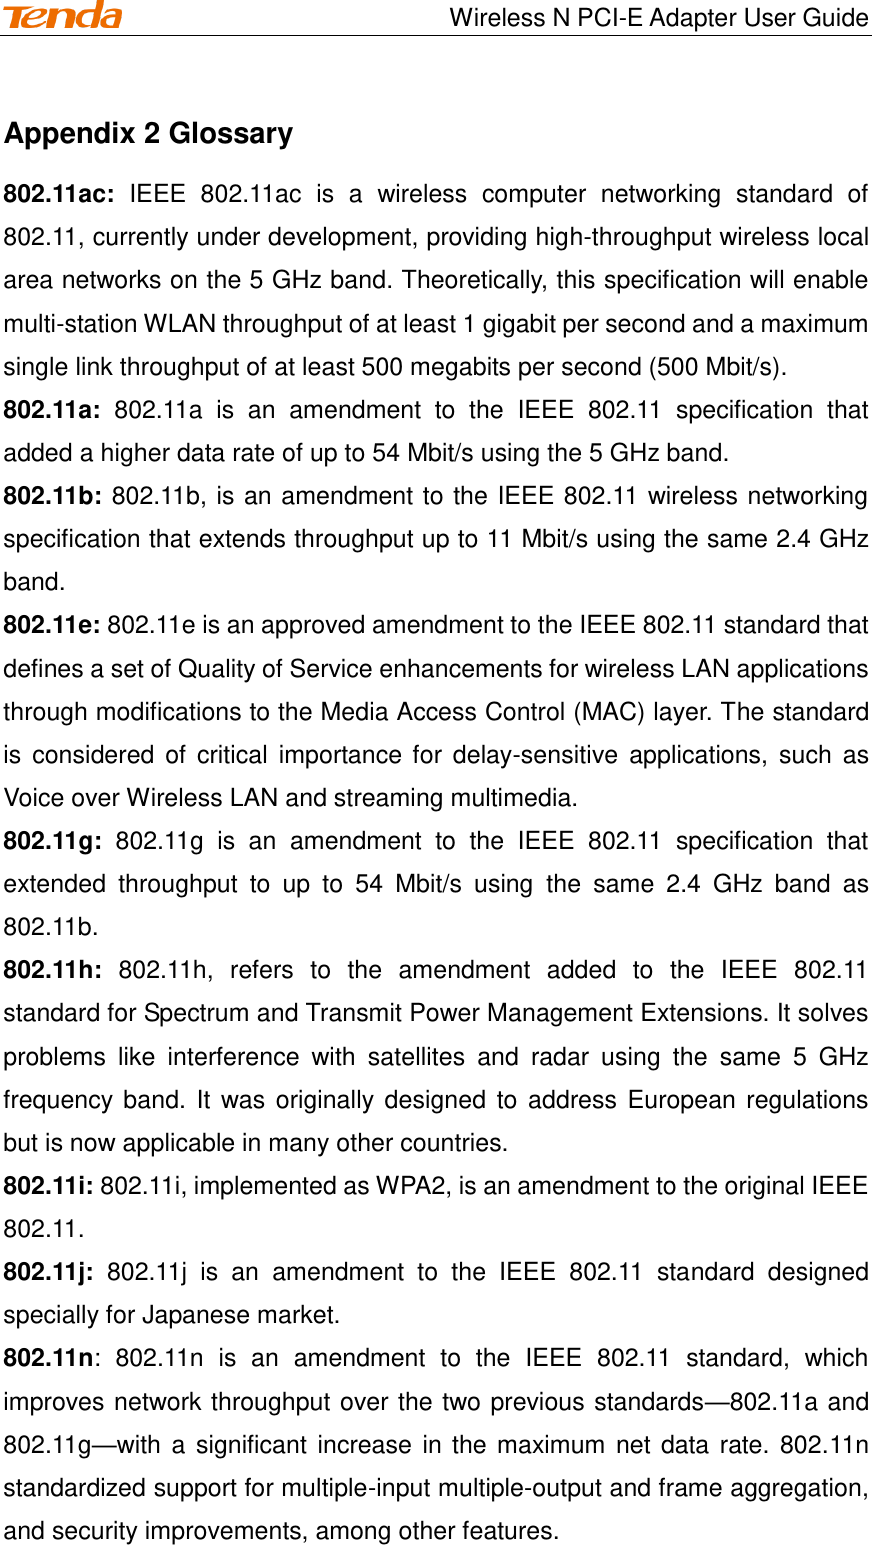                                    Wireless N PCI-E Adapter User Guide Appendix 2 Glossary 802.11ac:  IEEE  802.11ac  is  a  wireless  computer  networking  standard  of 802.11, currently under development, providing high-throughput wireless local area networks on the 5 GHz band. Theoretically, this specification will enable multi-station WLAN throughput of at least 1 gigabit per second and a maximum single link throughput of at least 500 megabits per second (500 Mbit/s). 802.11a:  802.11a  is  an  amendment  to  the  IEEE  802.11  specification  that added a higher data rate of up to 54 Mbit/s using the 5 GHz band. 802.11b: 802.11b, is an amendment to the IEEE 802.11 wireless networking specification that extends throughput up to 11 Mbit/s using the same 2.4 GHz band. 802.11e: 802.11e is an approved amendment to the IEEE 802.11 standard that defines a set of Quality of Service enhancements for wireless LAN applications through modifications to the Media Access Control (MAC) layer. The standard is  considered  of  critical  importance for  delay-sensitive  applications, such  as Voice over Wireless LAN and streaming multimedia. 802.11g:  802.11g  is  an  amendment  to  the  IEEE  802.11  specification  that extended  throughput  to  up  to  54  Mbit/s  using  the  same  2.4  GHz  band  as 802.11b.   802.11h:  802.11h,  refers  to  the  amendment  added  to  the  IEEE  802.11 standard for Spectrum and Transmit Power Management Extensions. It solves problems  like  interference  with  satellites  and  radar  using  the  same  5  GHz frequency band. It  was originally designed  to address European regulations but is now applicable in many other countries. 802.11i: 802.11i, implemented as WPA2, is an amendment to the original IEEE 802.11. 802.11j:  802.11j  is  an  amendment  to  the  IEEE  802.11  standard  designed specially for Japanese market. 802.11n:  802.11n  is  an  amendment  to  the  IEEE  802.11  standard,  which improves network throughput over the two previous standards—802.11a and 802.11g—with a significant increase in the maximum net data rate. 802.11n standardized support for multiple-input multiple-output and frame aggregation, and security improvements, among other features. 